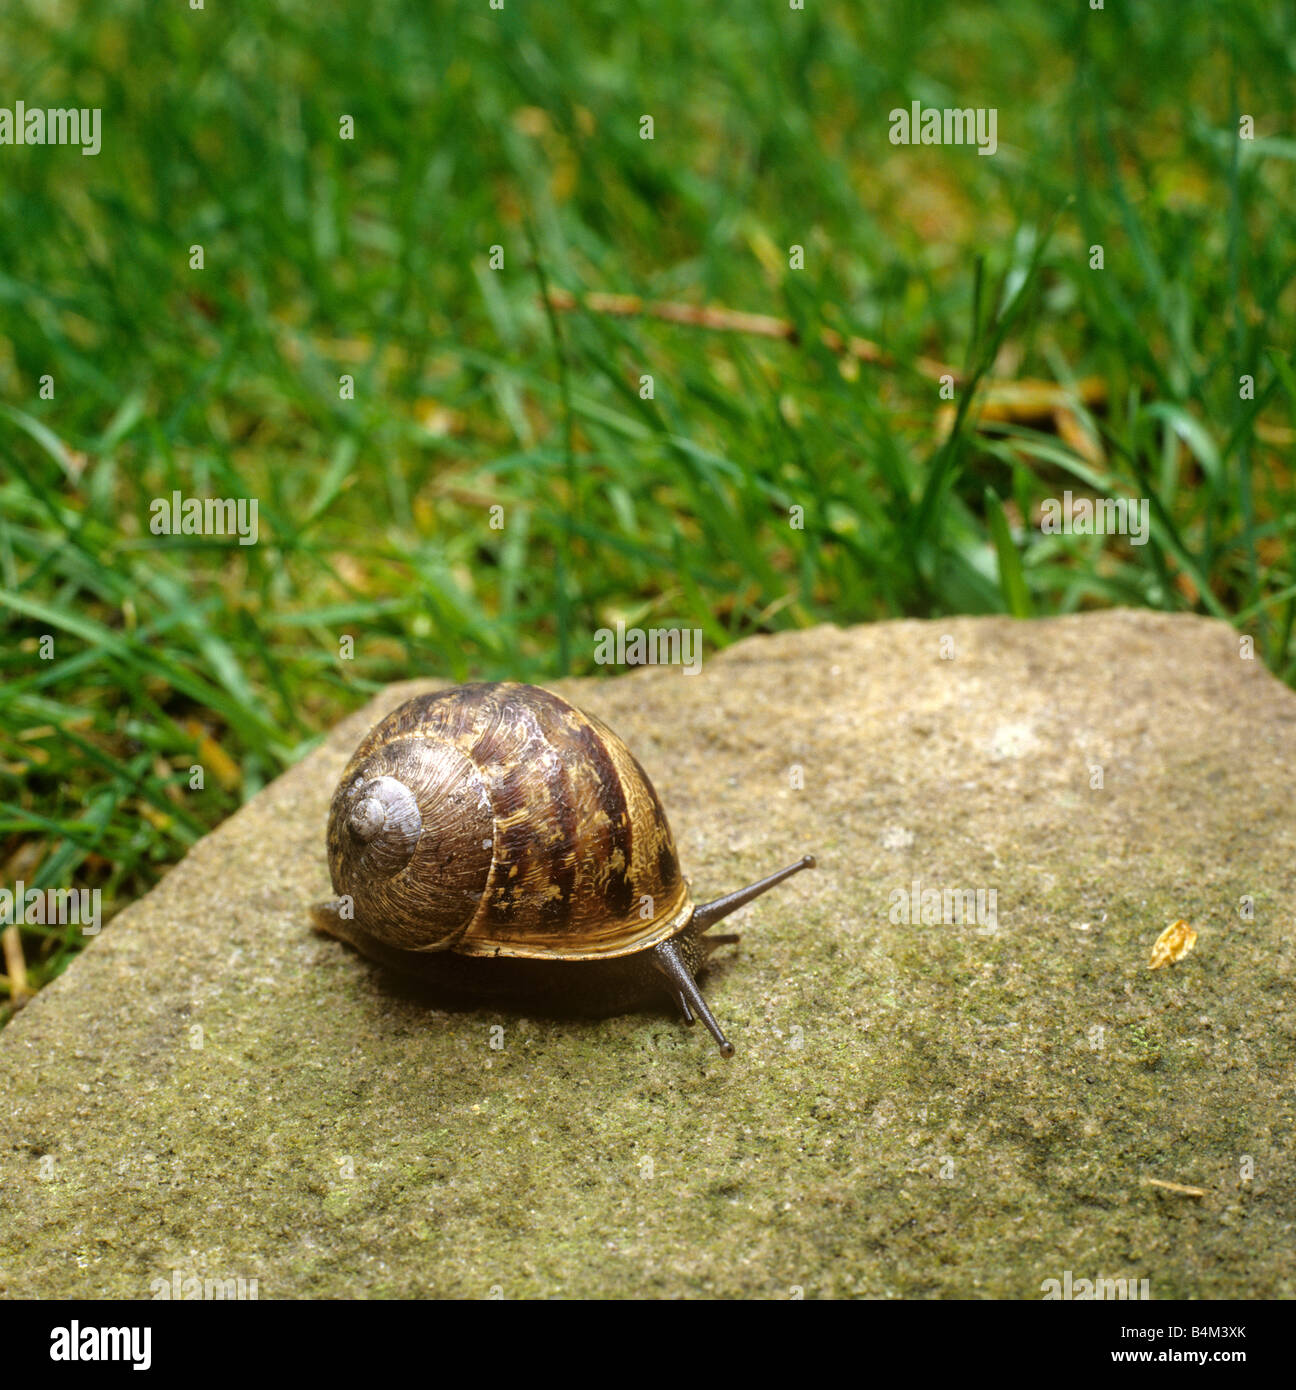 Garden pests snail on stone in lawn Stock Photo